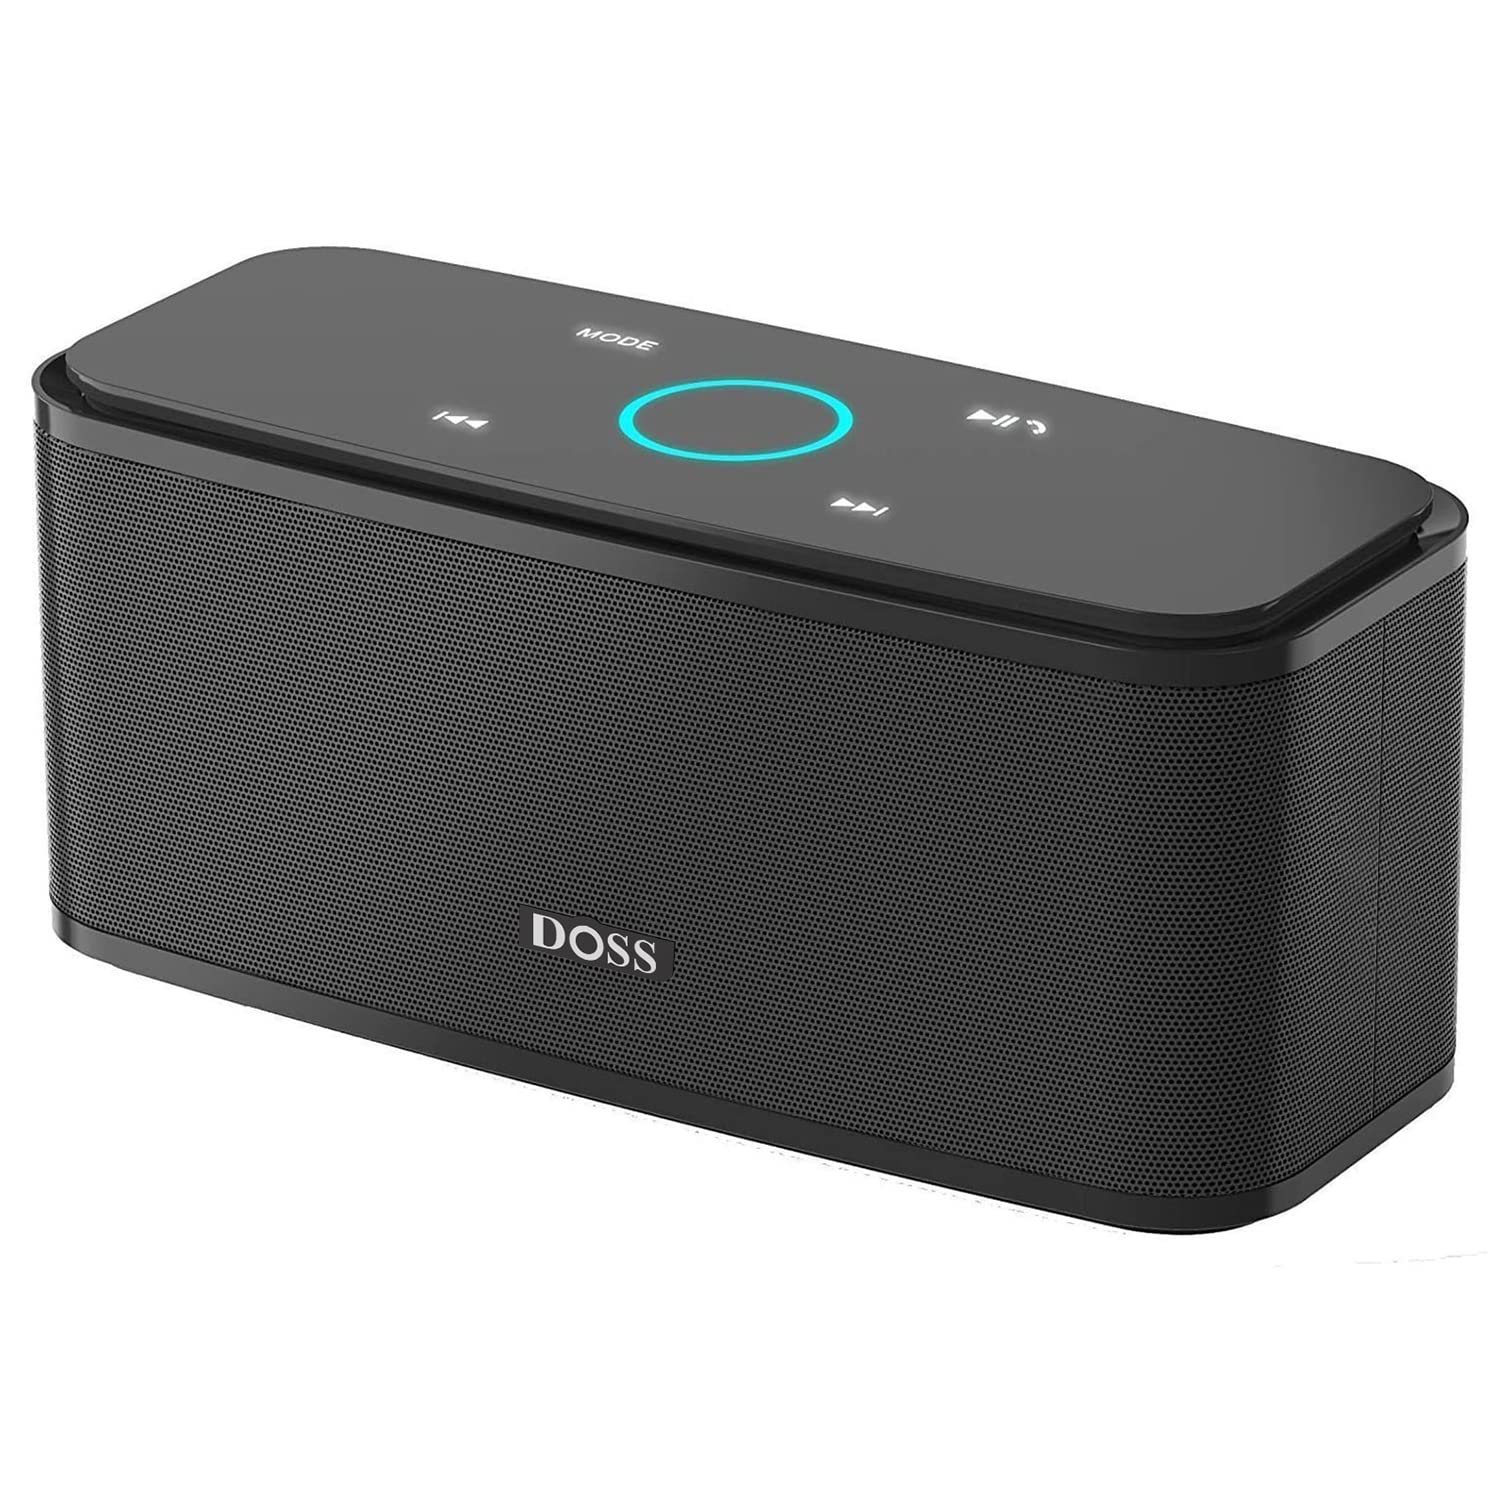 DOSS Bluetooth Speaker, SoundBox Touch Portable Wireless Speaker with 12W HD Sound and Bass, IPX5 Water-Resistant, 20H Playtime, Touch Control, Handsfree, Speaker for Home, Outdoor, Travel-Black